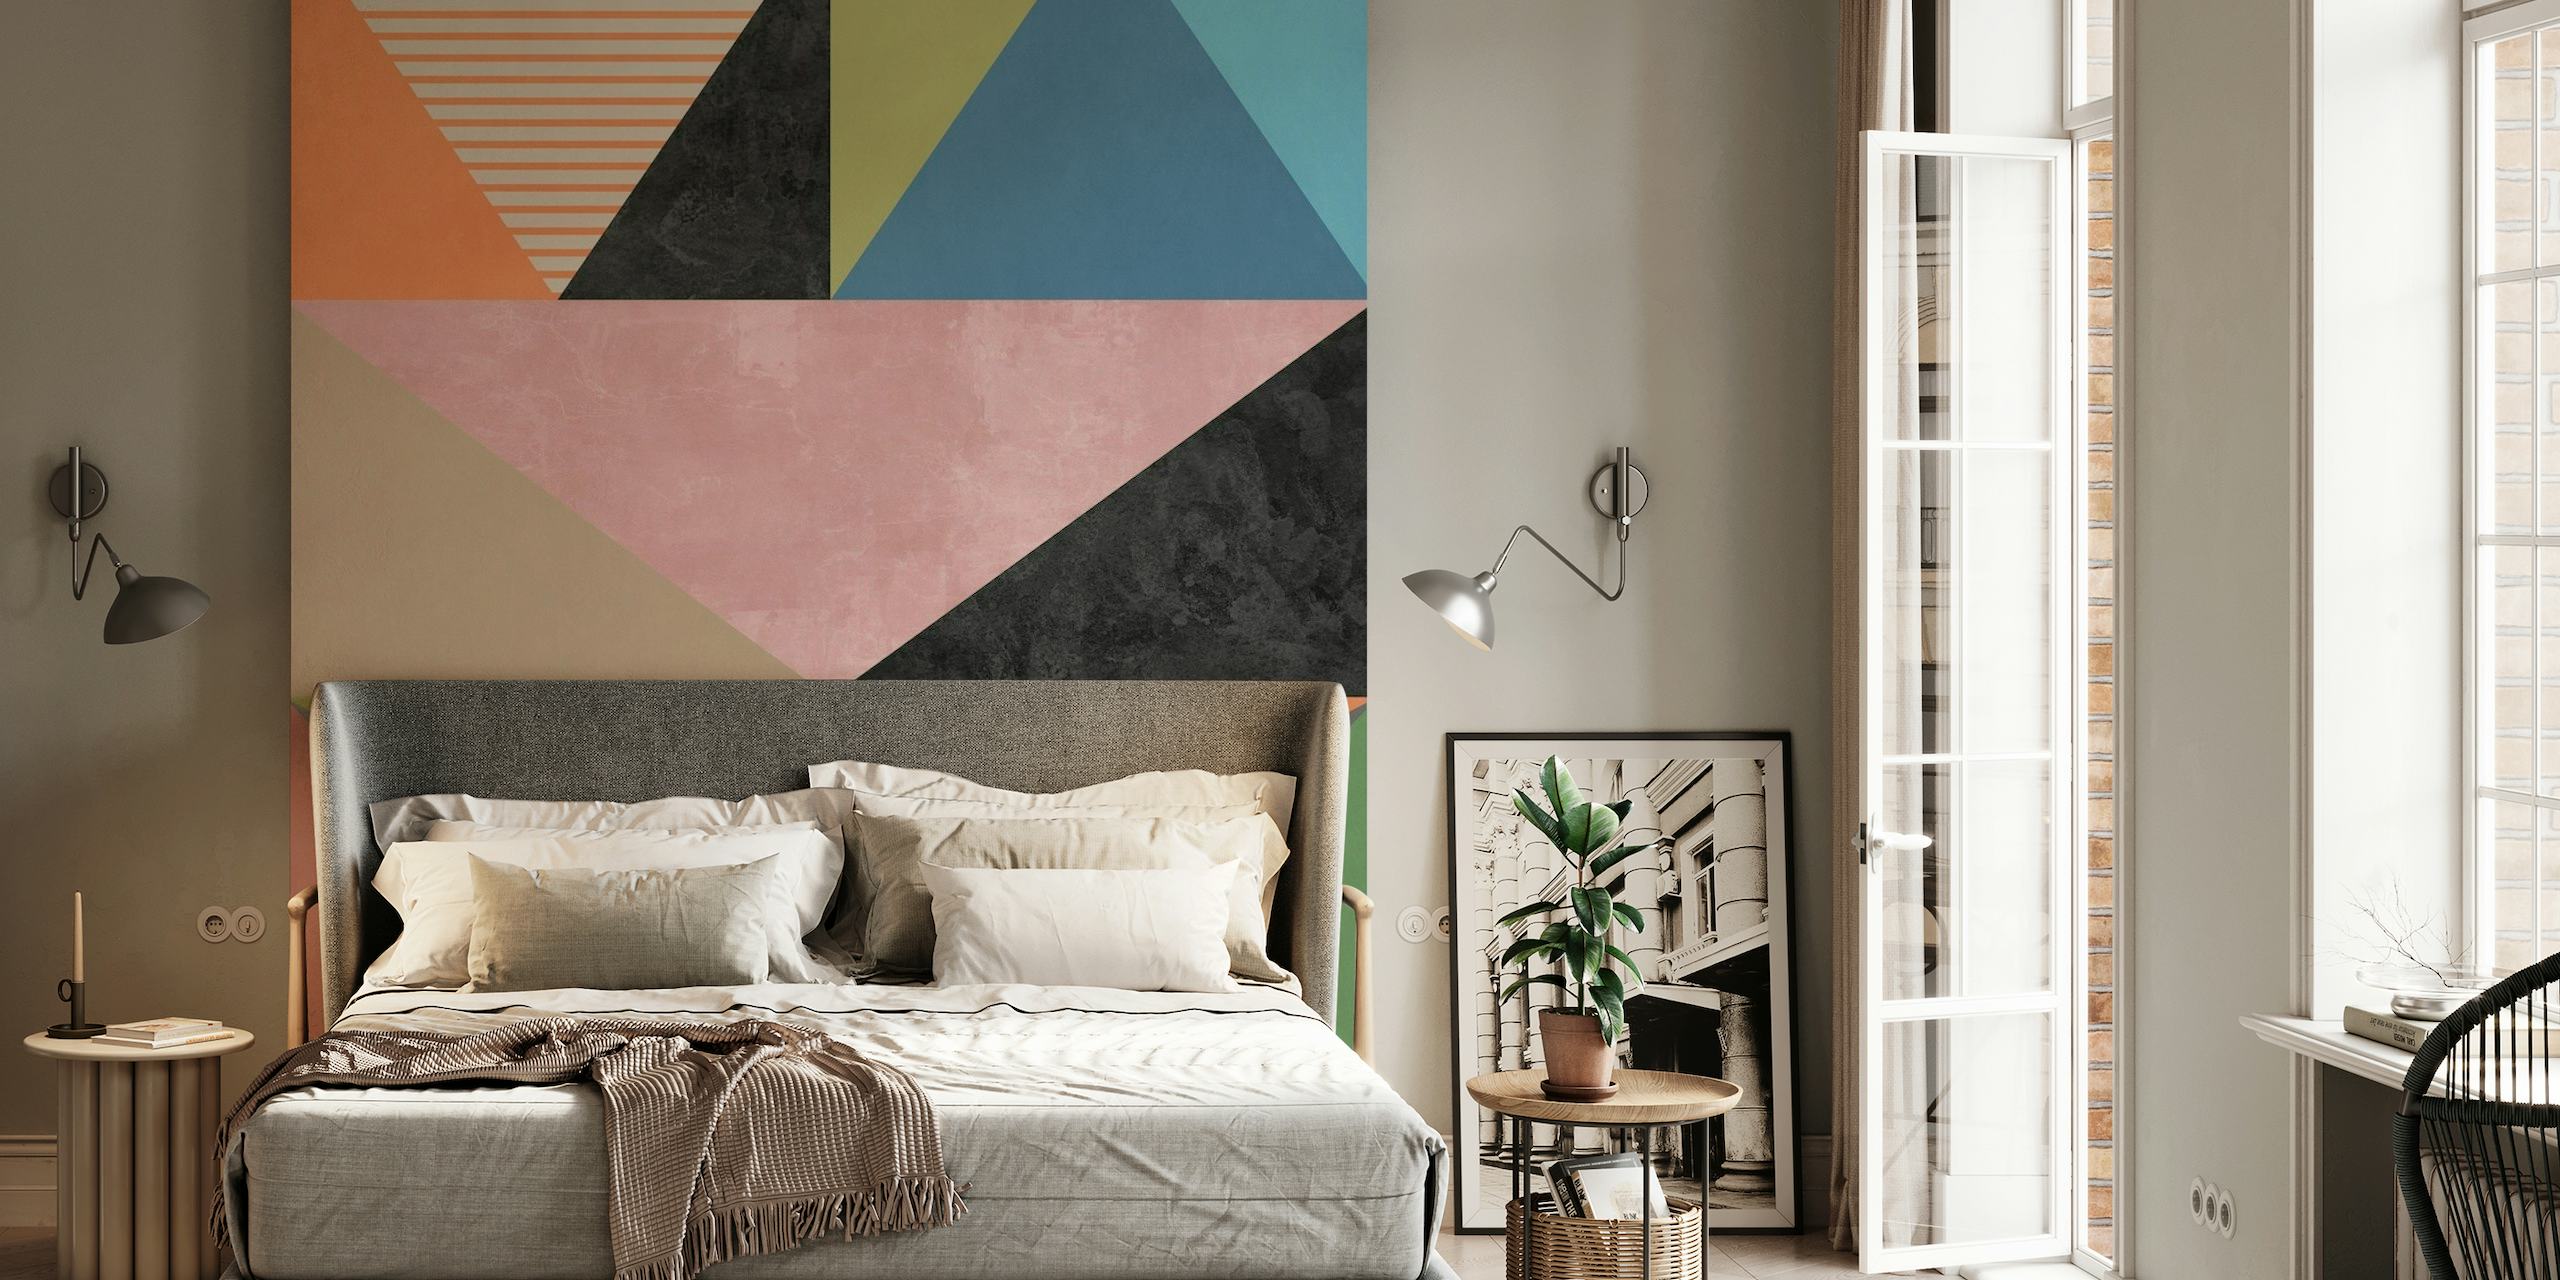 Abstract geometric wall mural with pastel triangles and striped patterns